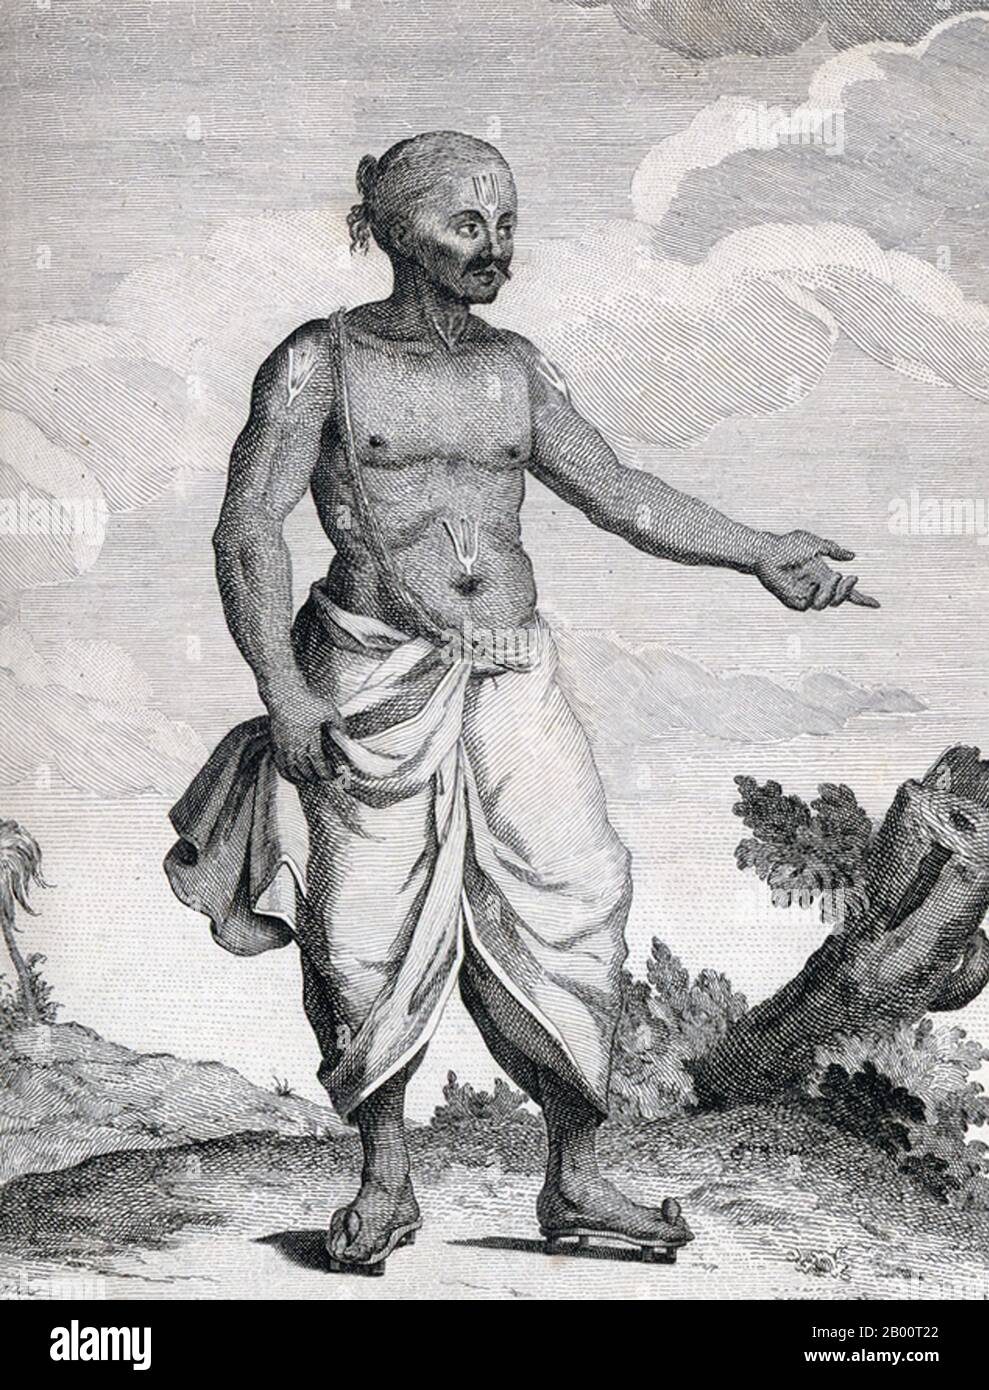 India/France: 'An Brahmin follower of Vishnu'. Engraving by Pierre Sonnerat (1748-1814), 1782.  Pierre Sonnerat (1748-1814) was a French naturalist and explorer who made several voyages to Southeast Asia between 1769 and 1781. He published this two-volume account of his voyage in 1782.  Volume 1 deals exclusively with India, whose culture Sonnerat very much admired, and is especially noteworthy for its extended discussion of religion in India, Hinduism in particular. Volume 2 covers Sonnerat’s travels to China, Burma, Madagascar, the Maldives, Mauritius, Ceylon, Indonesia and the Philippines. Stock Photo